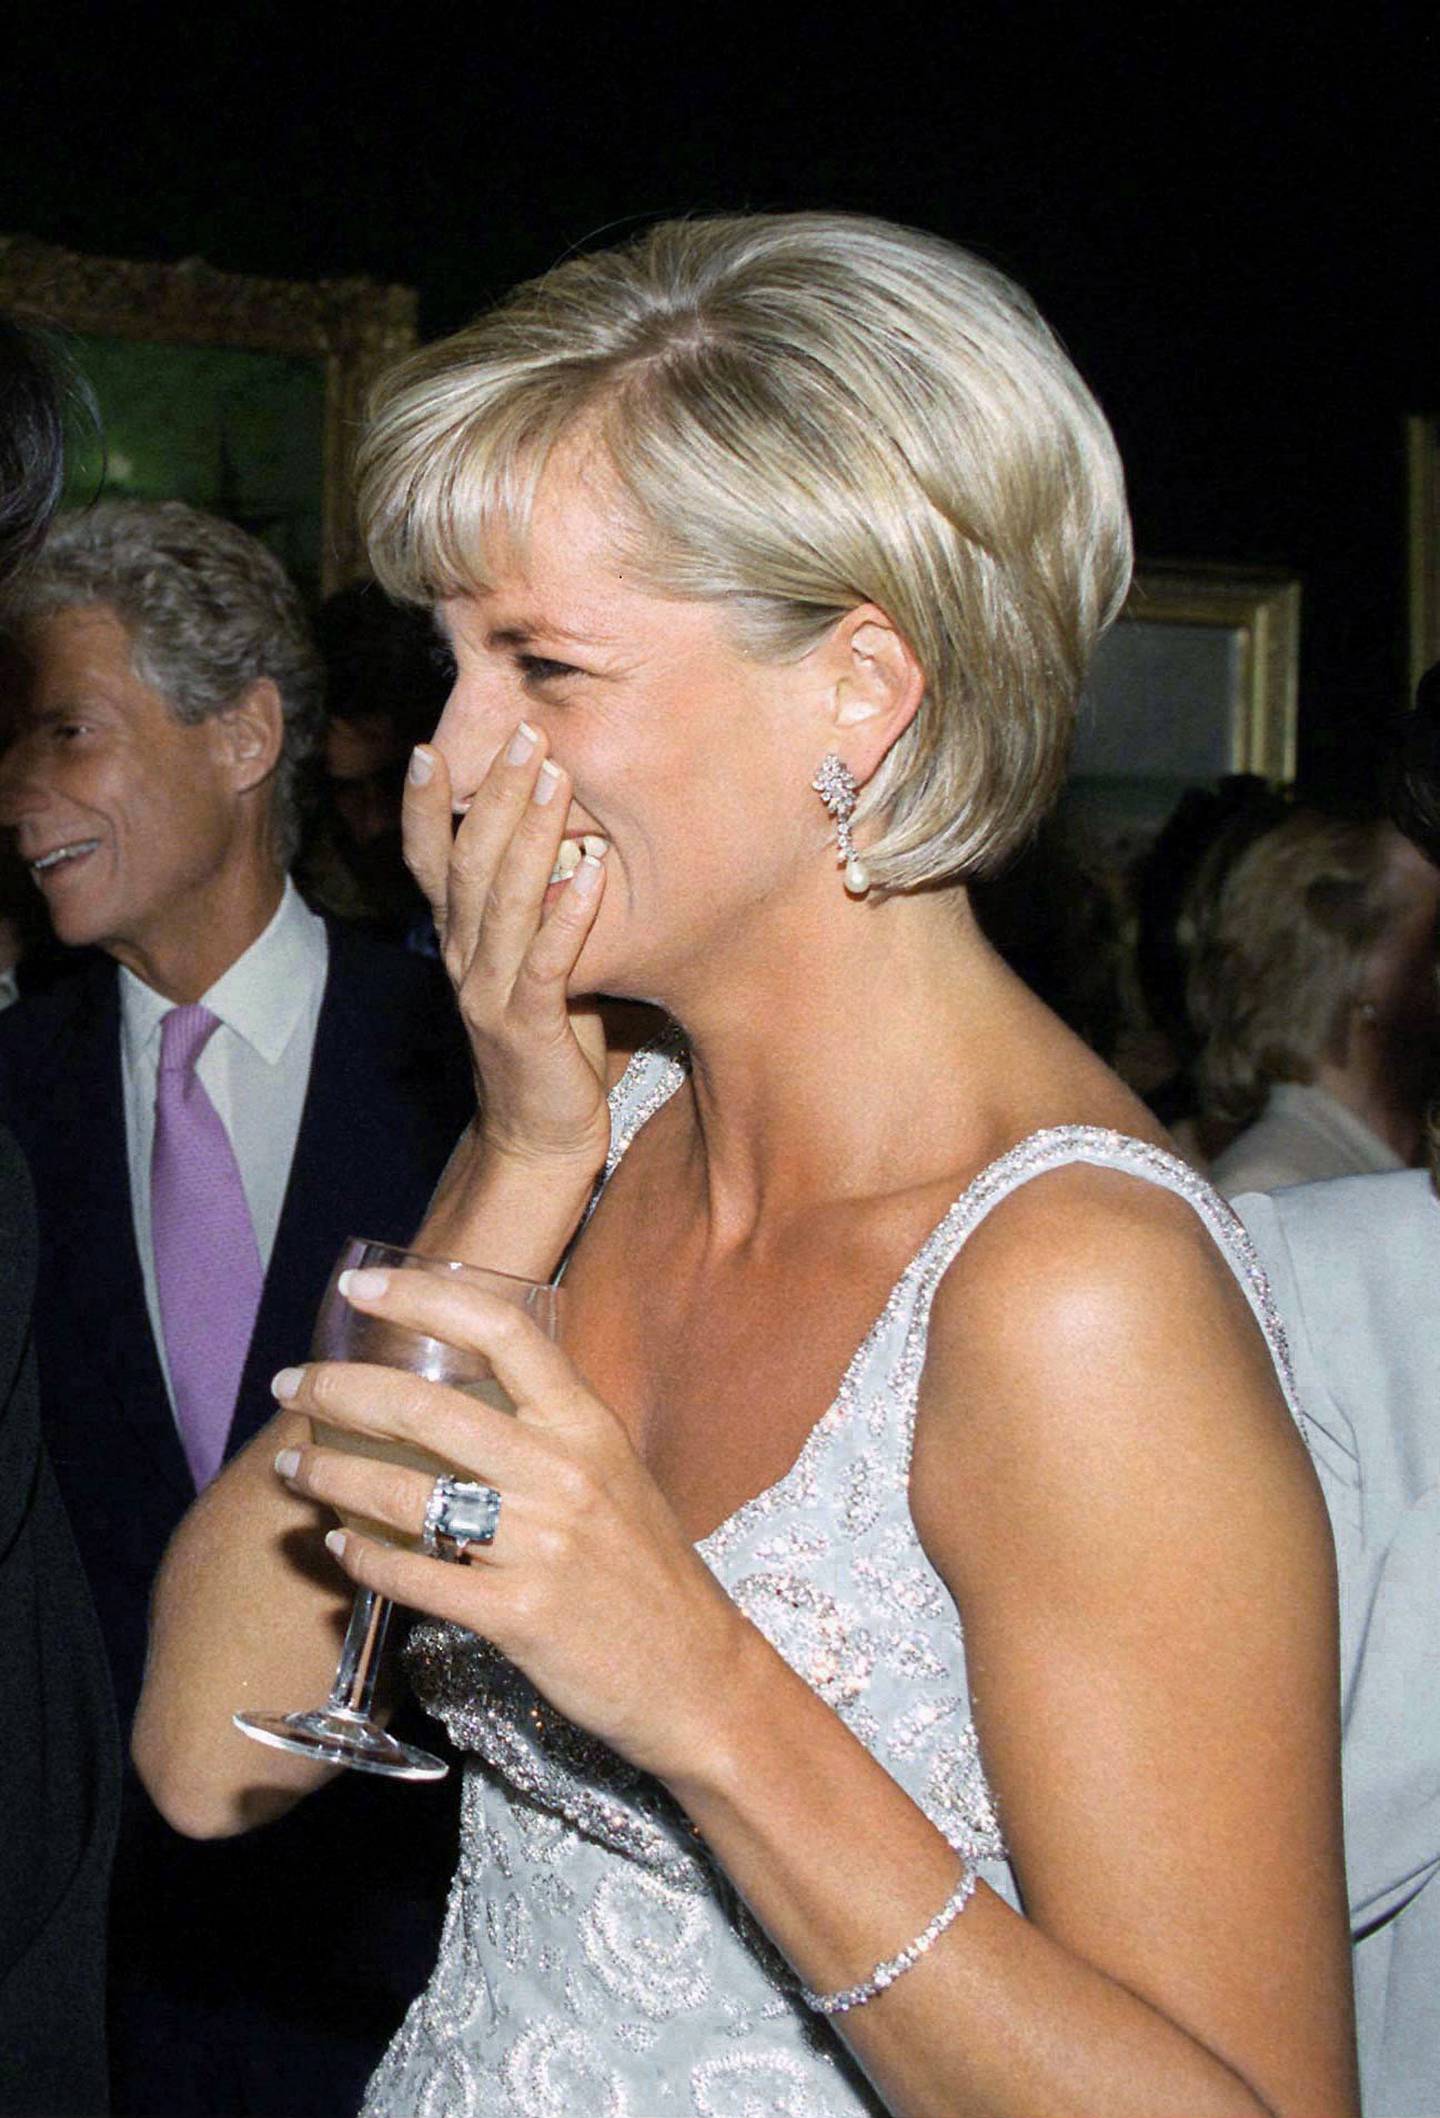 Diana, Princess of Wales attends a Christie's pre-auction party in London on June 2, 1997. Getty Images 